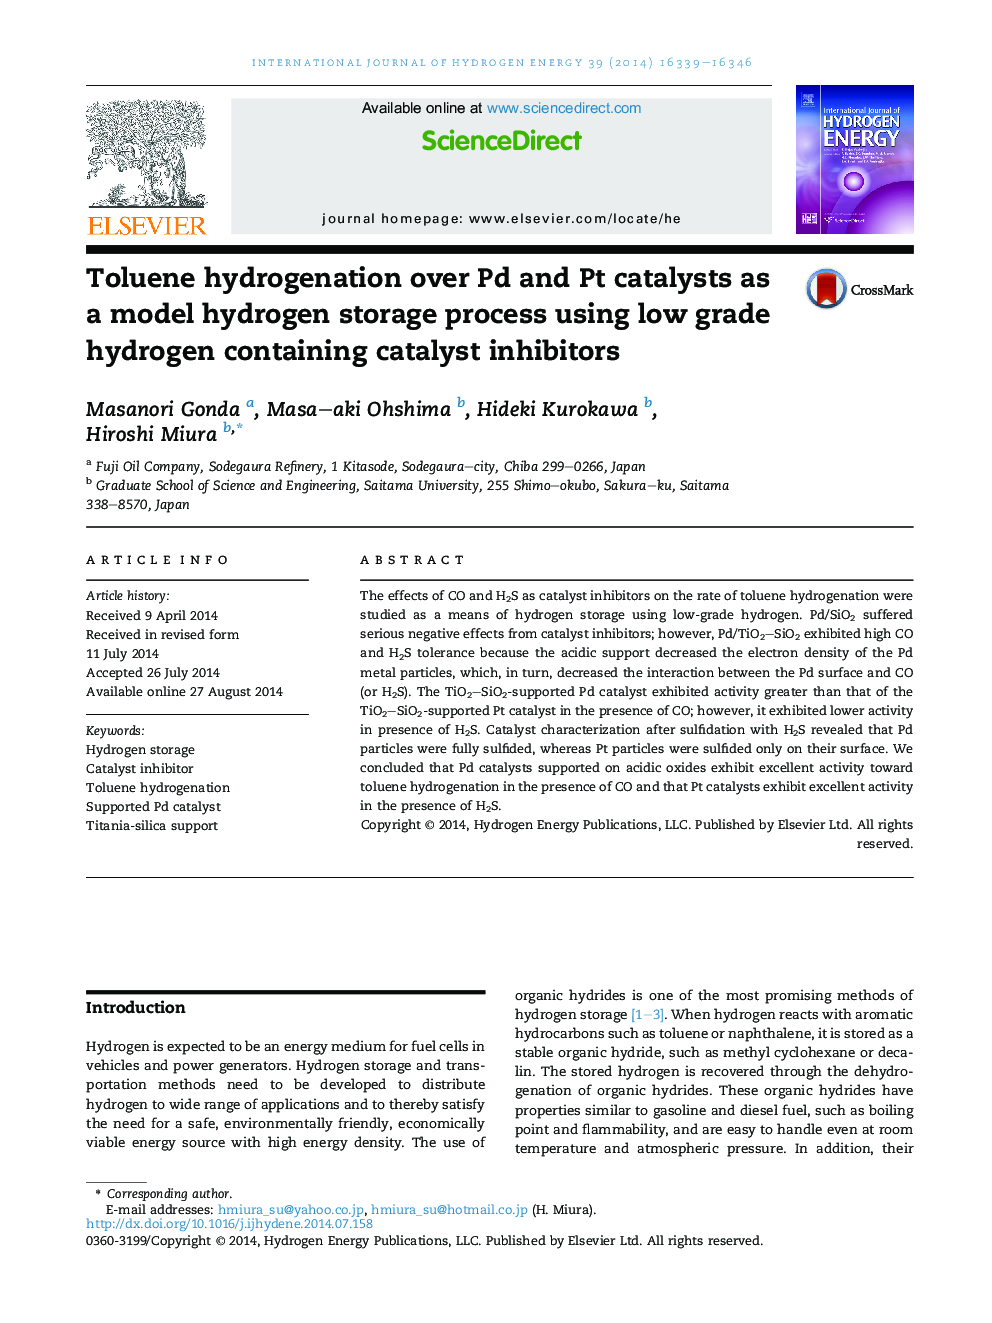 Toluene hydrogenation over Pd and Pt catalysts as a model hydrogen storage process using low grade hydrogen containing catalyst inhibitors